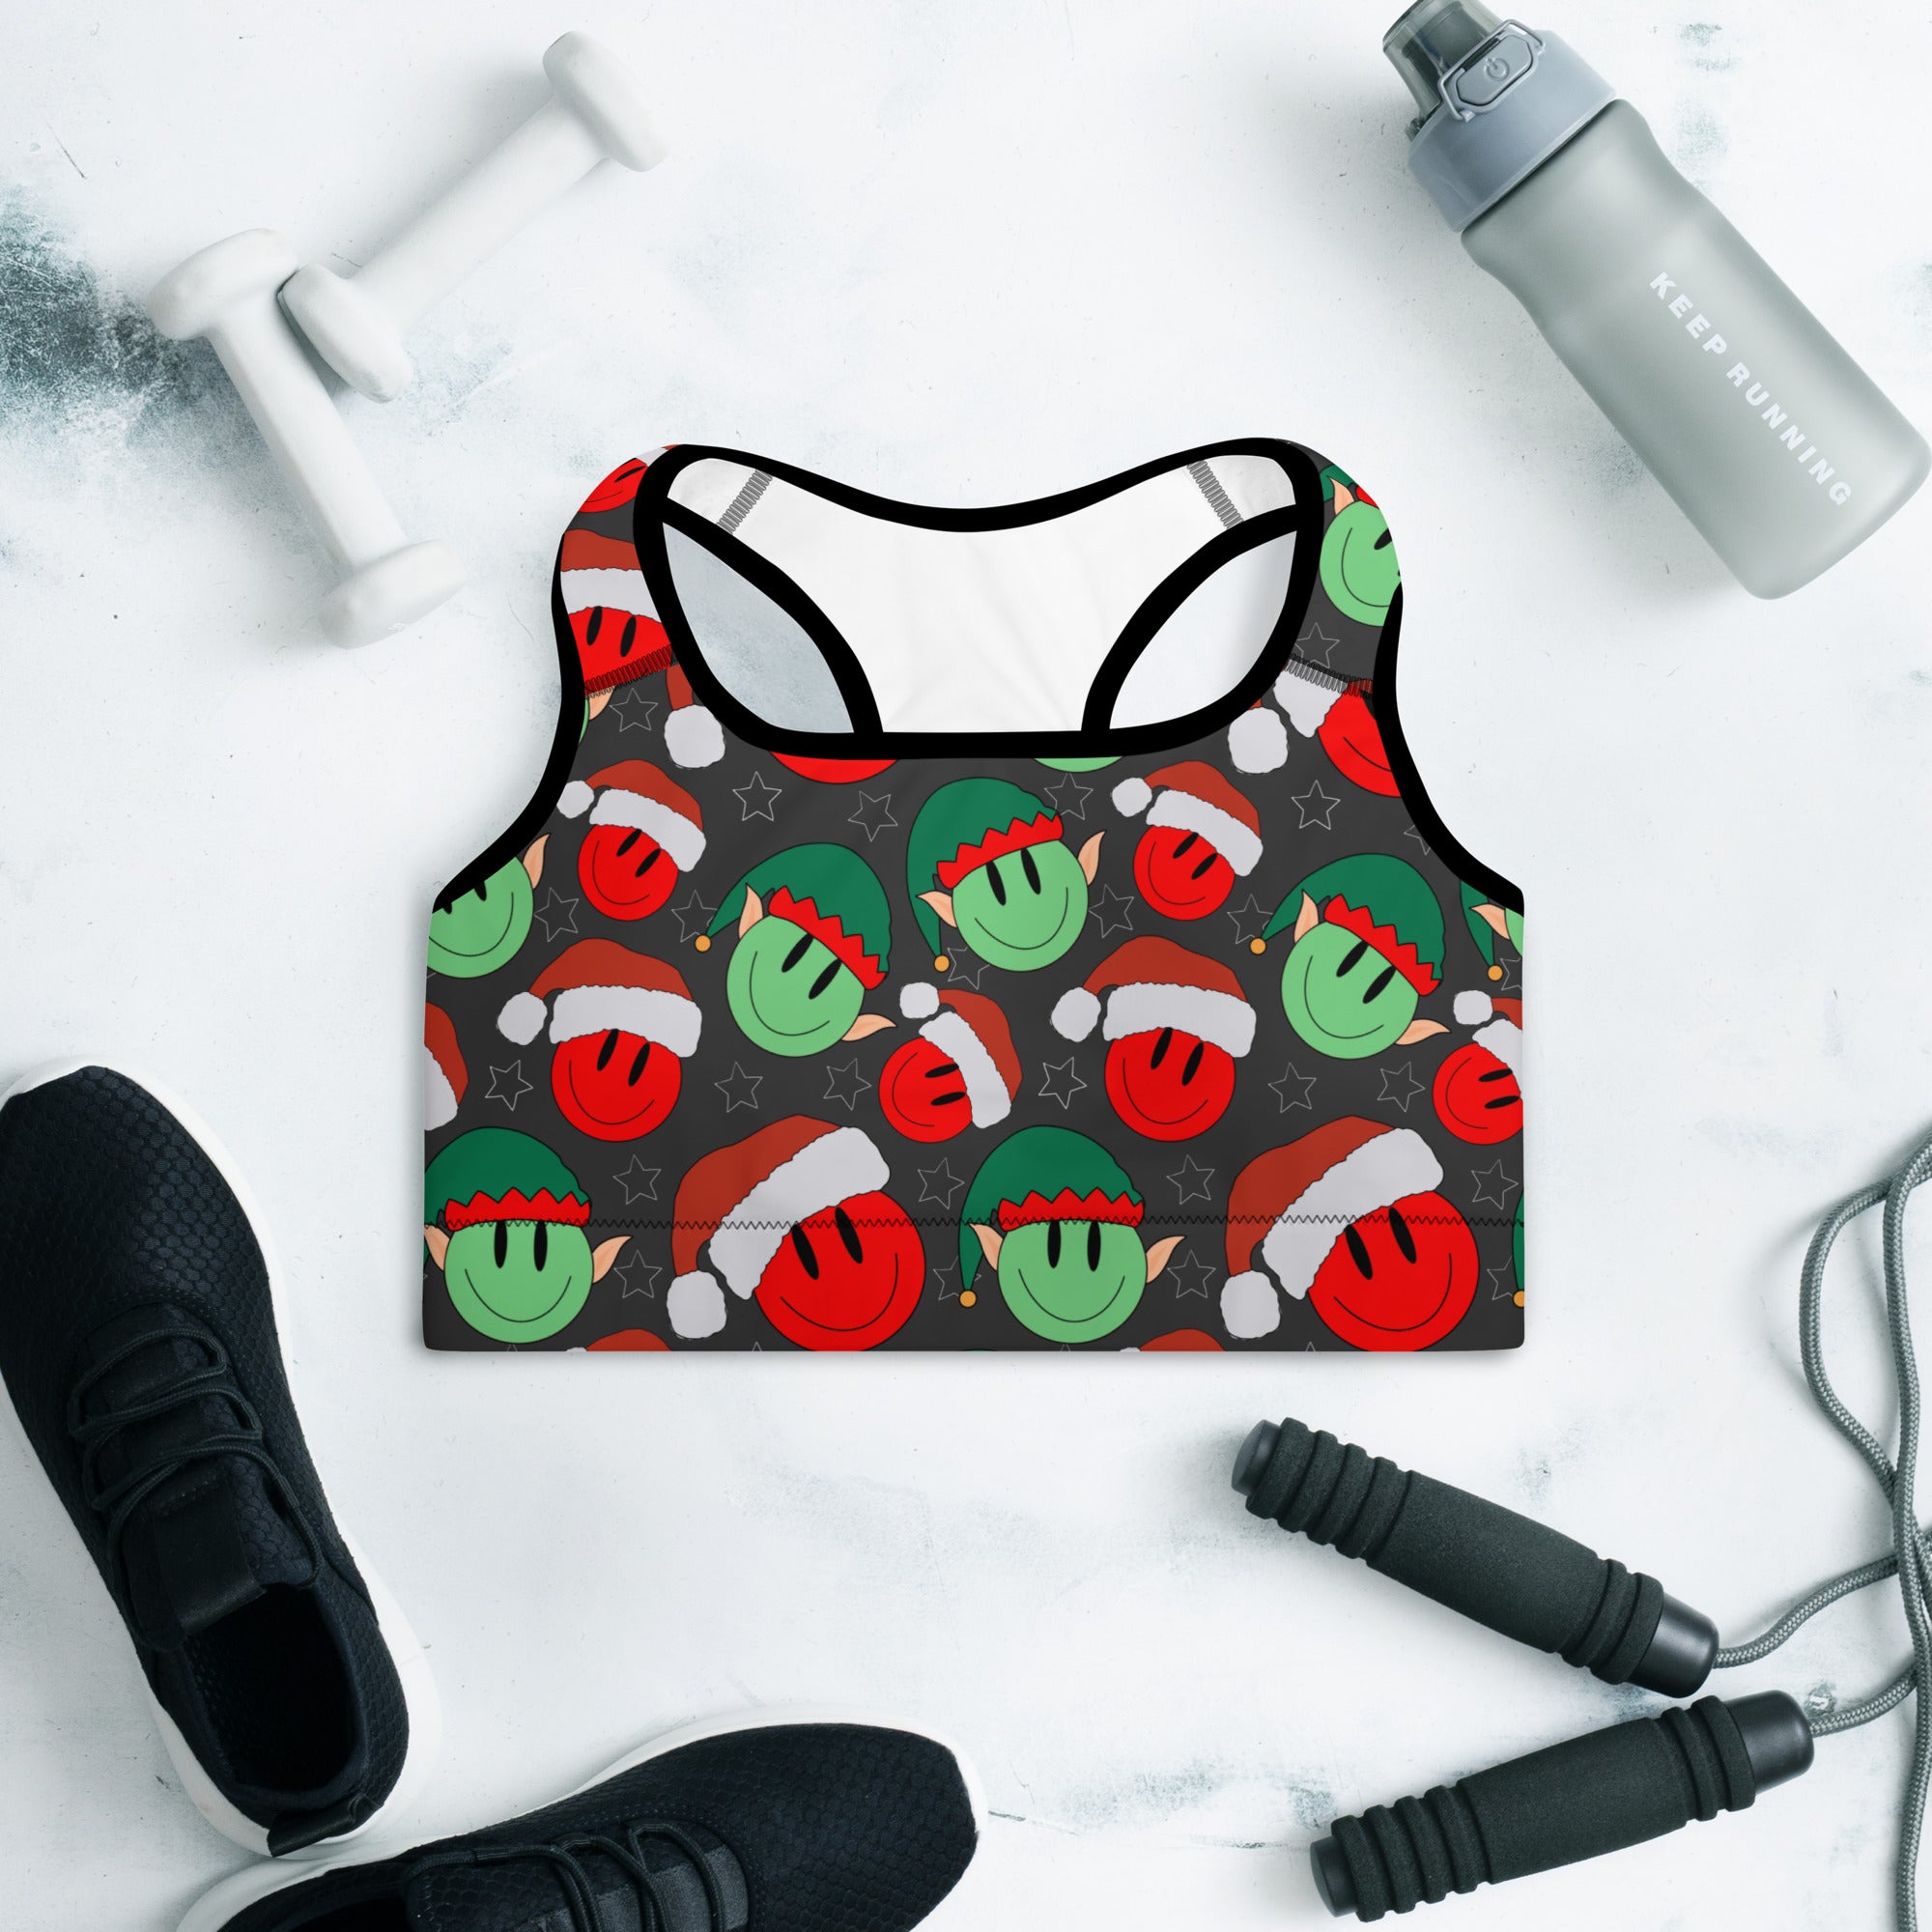 Elves And Smiley Faces Padded Sports Bra